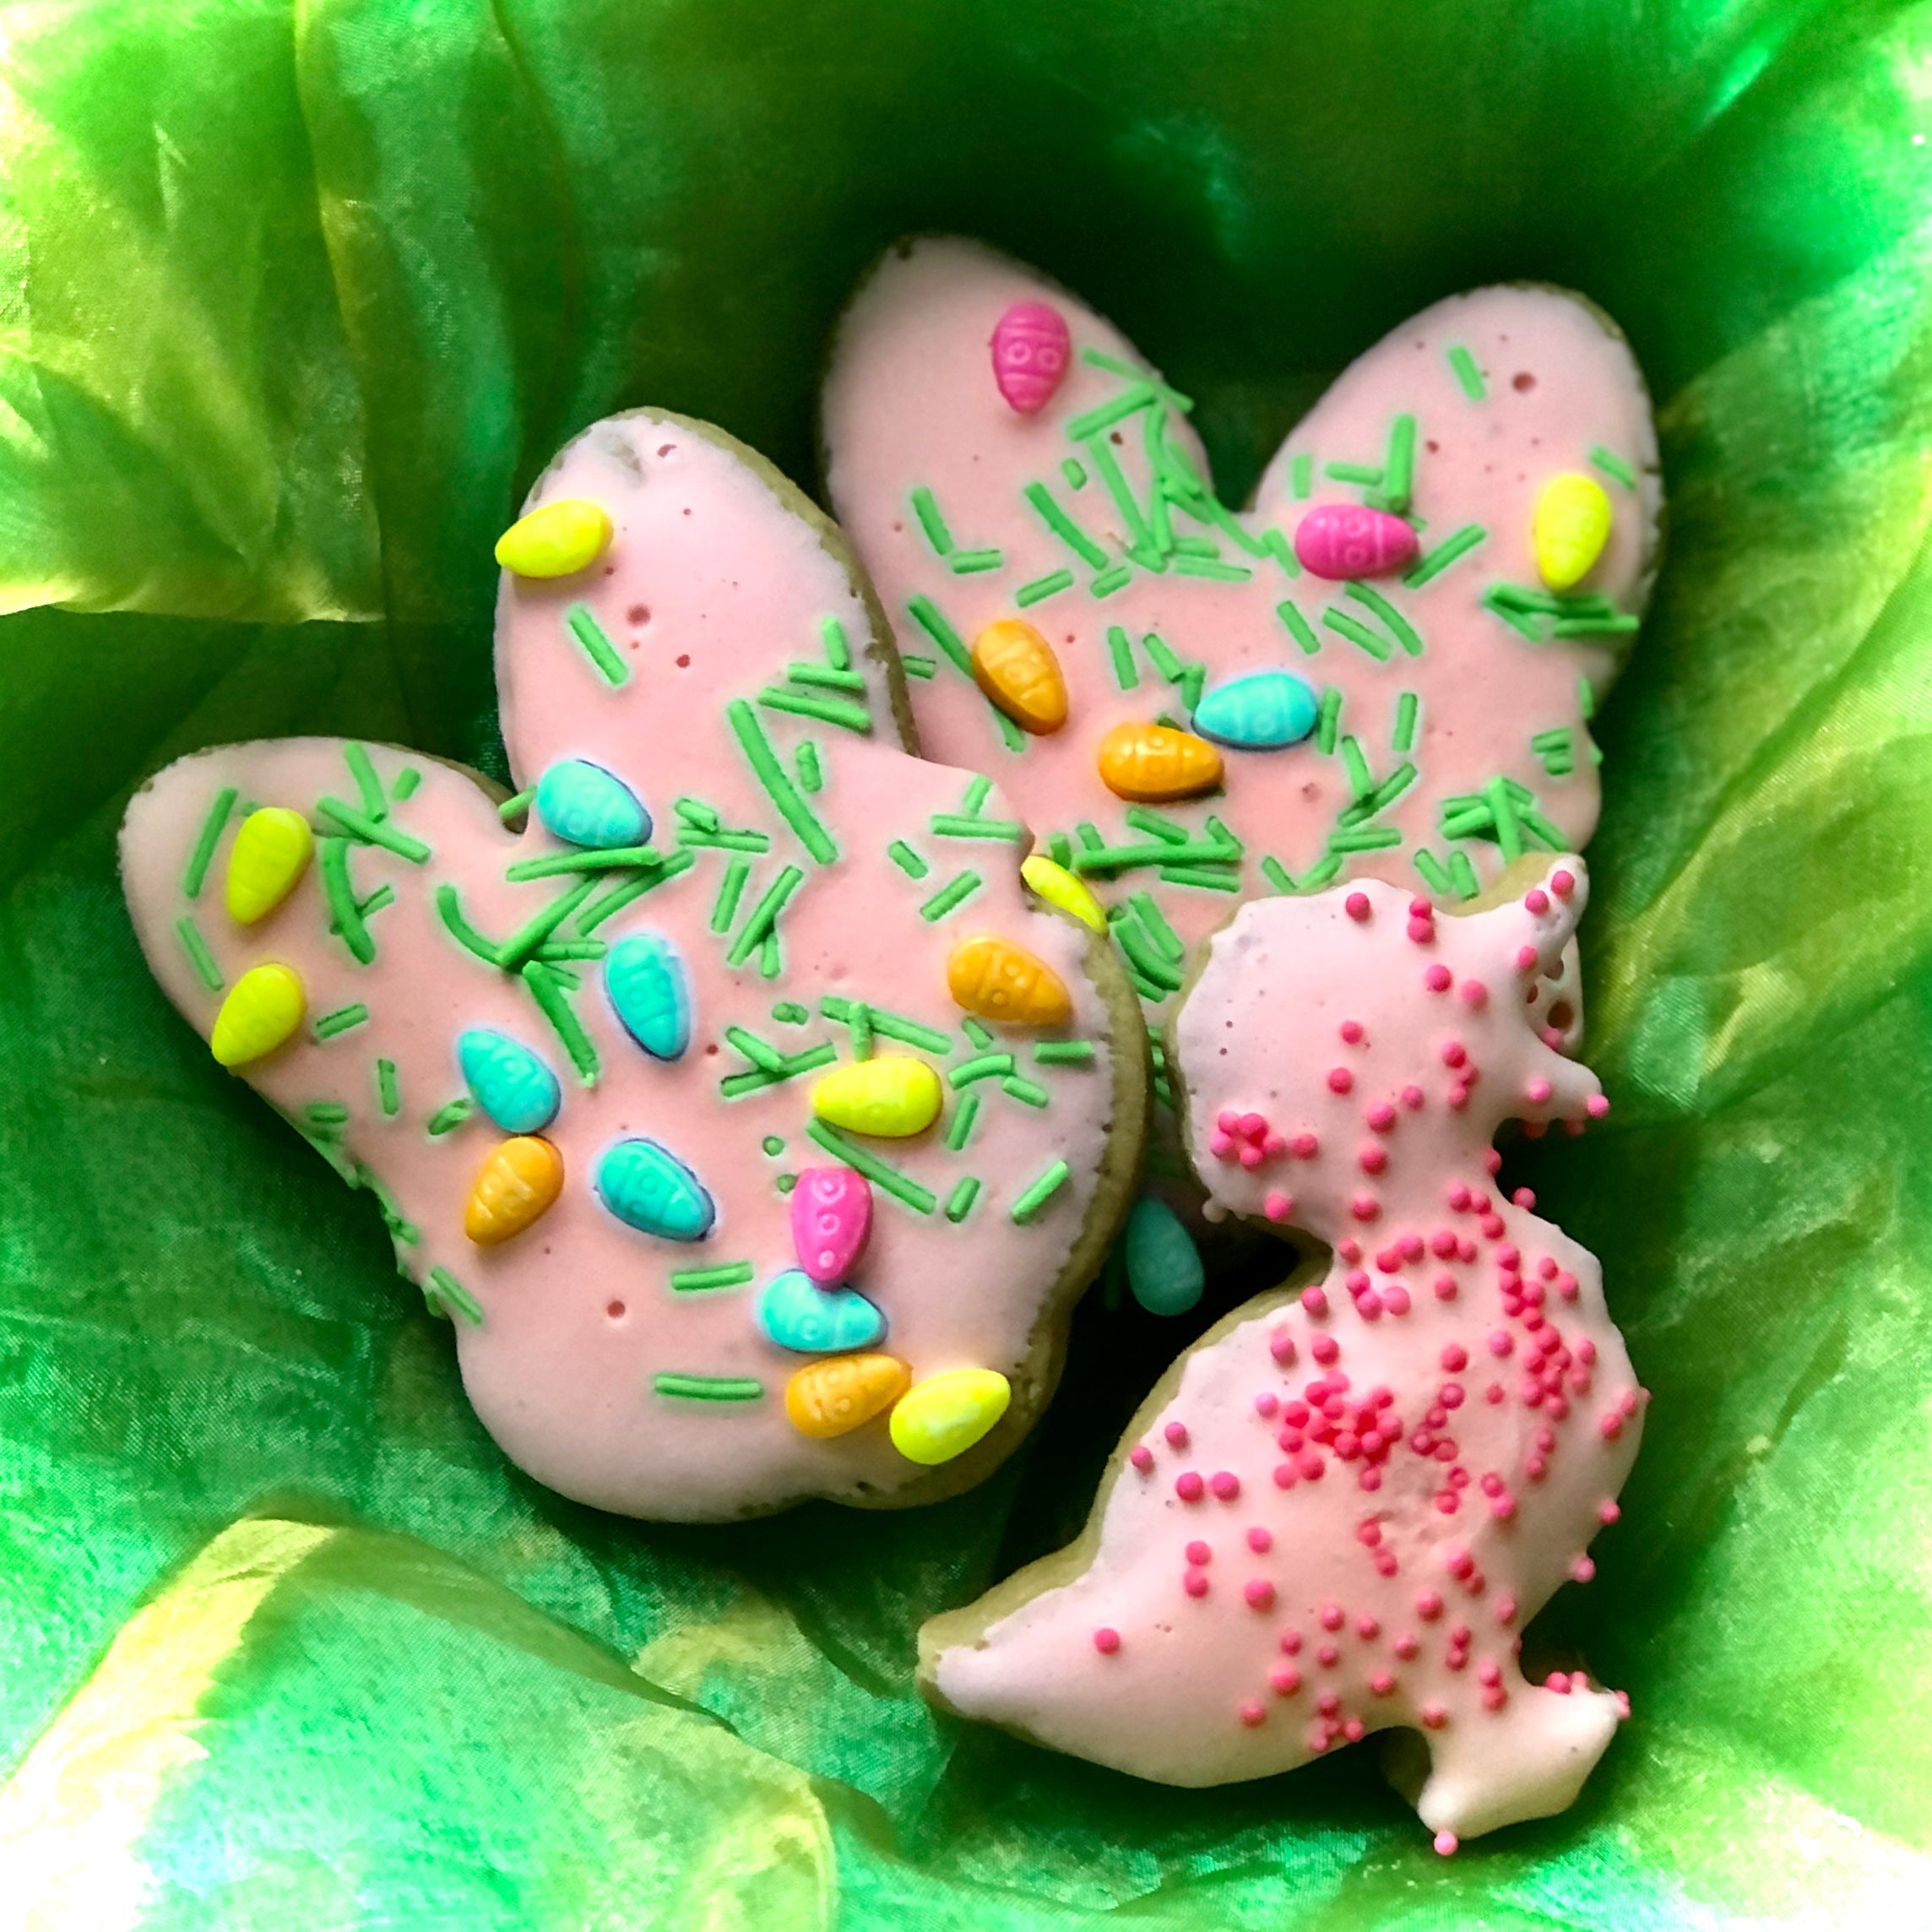 Pink Easter Cookies sitting on green fabric